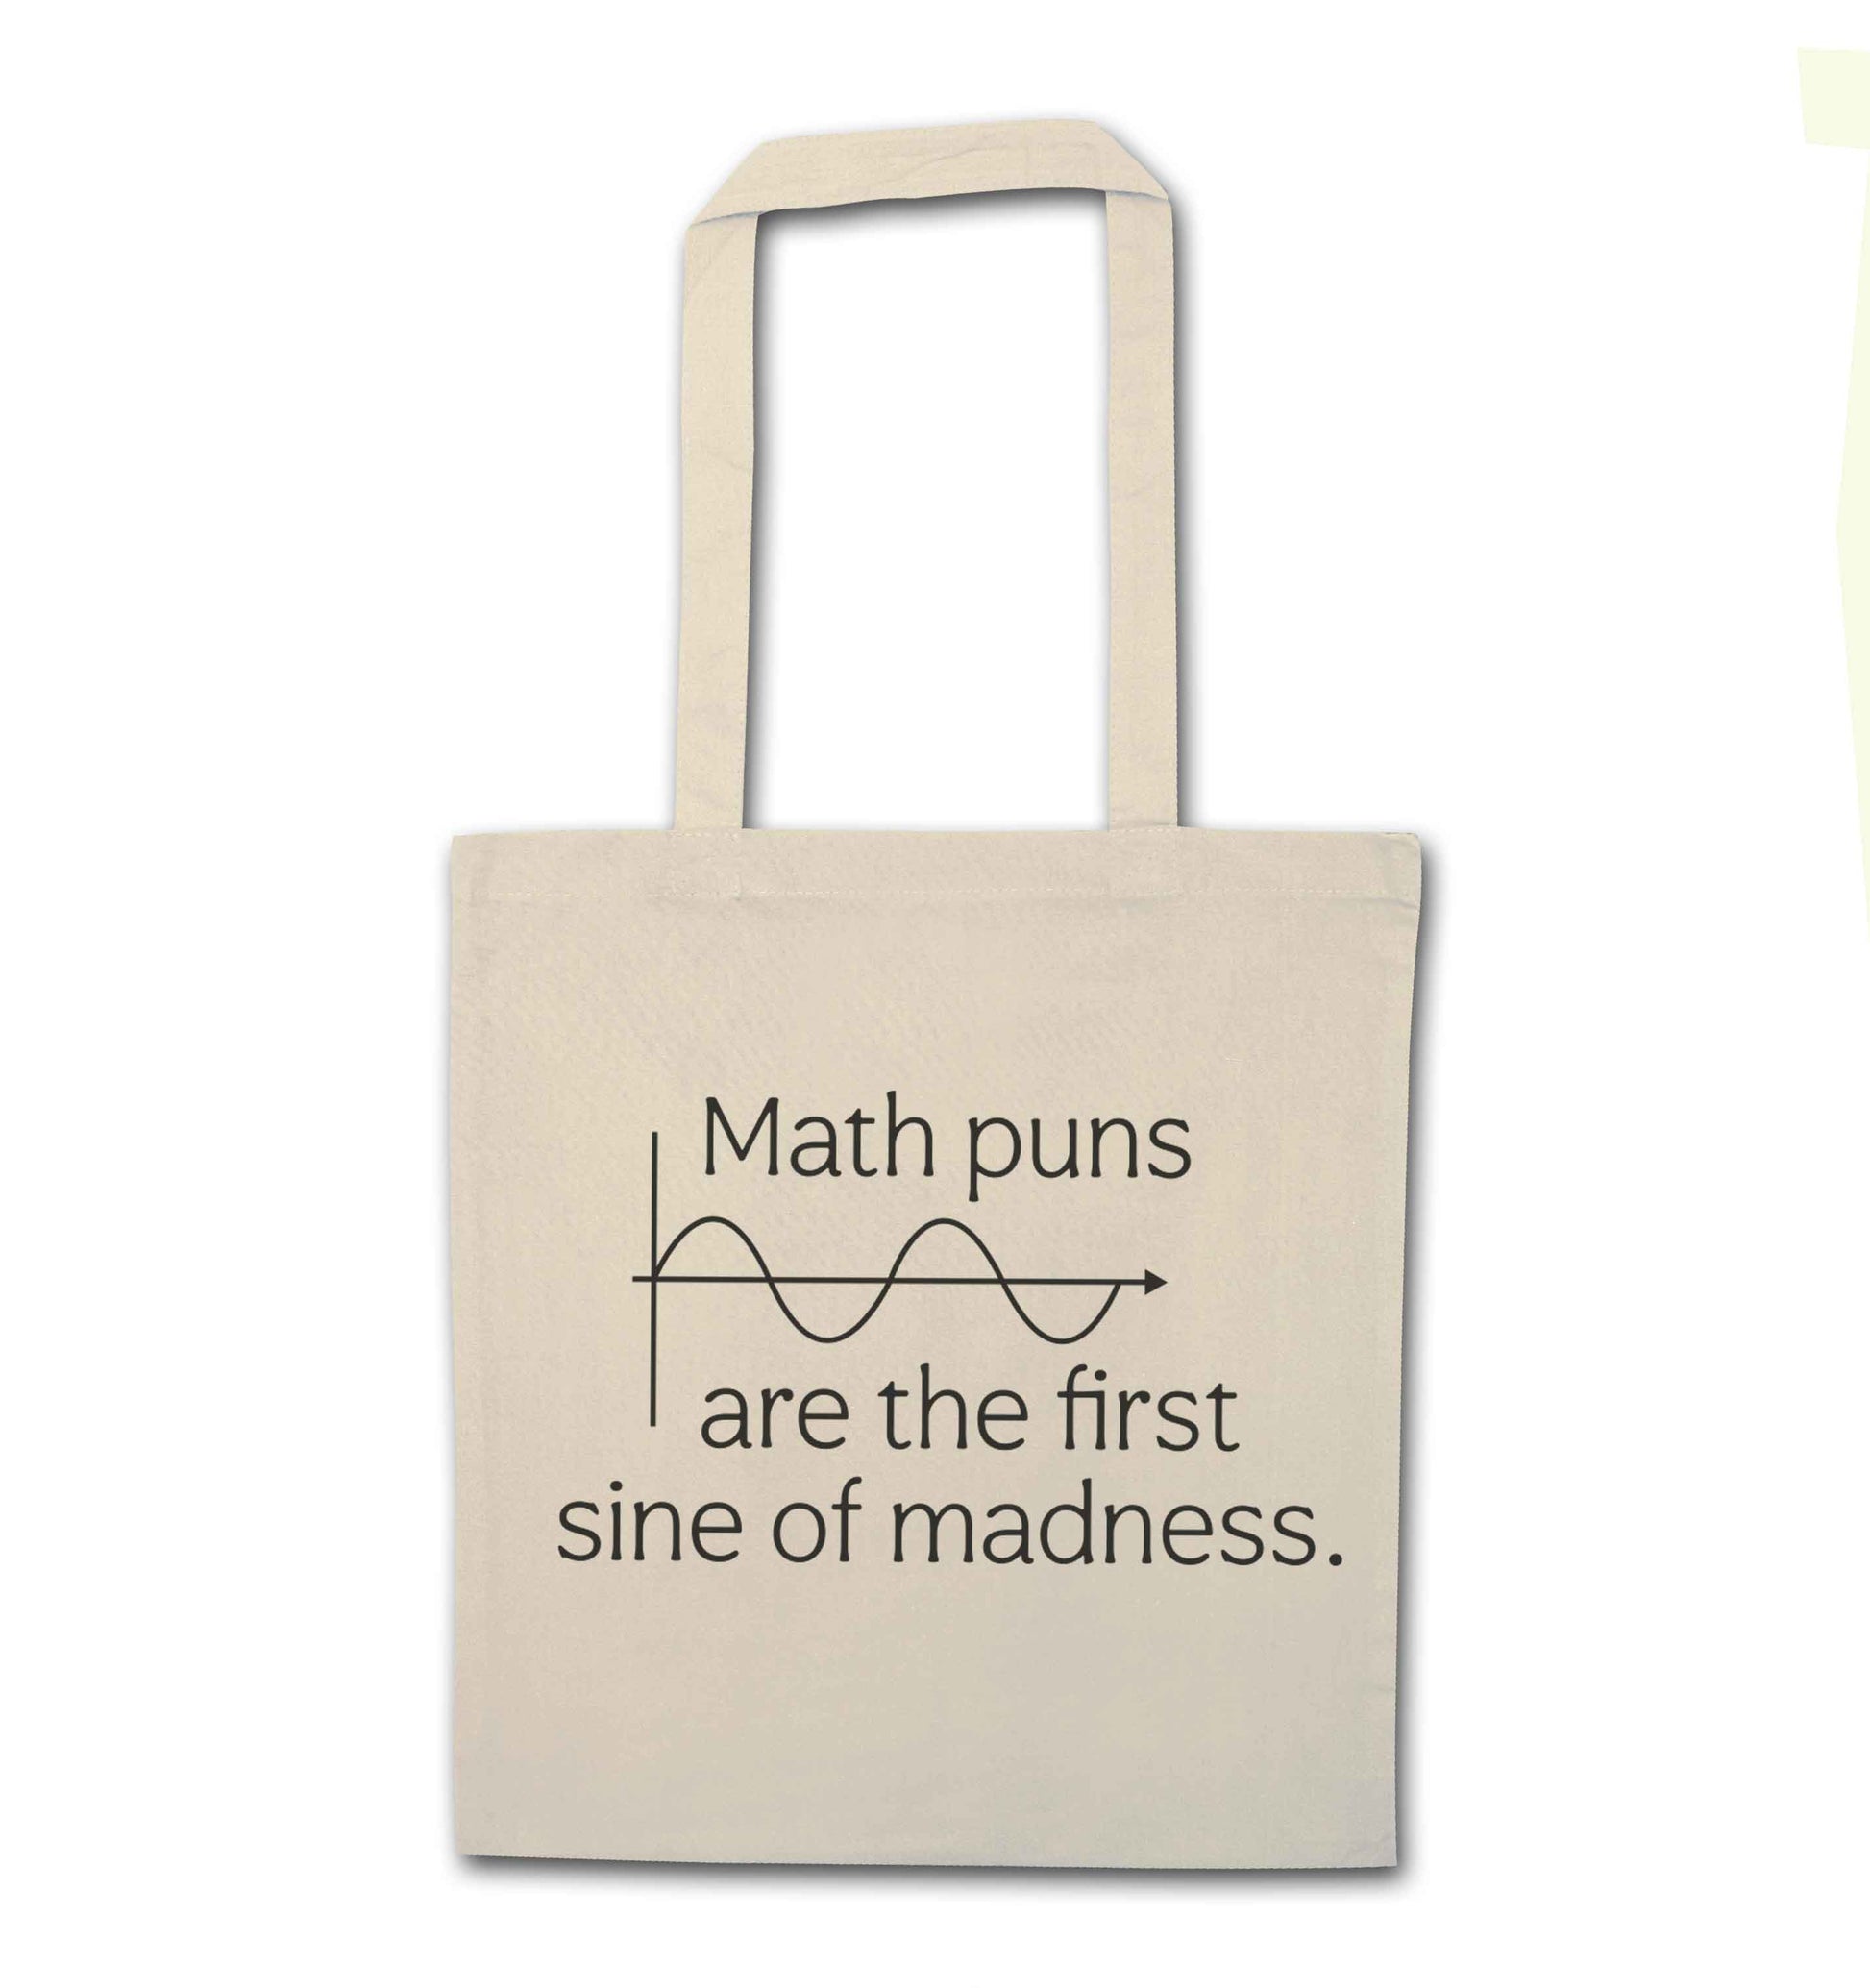 Math puns are the first sine of madness natural tote bag